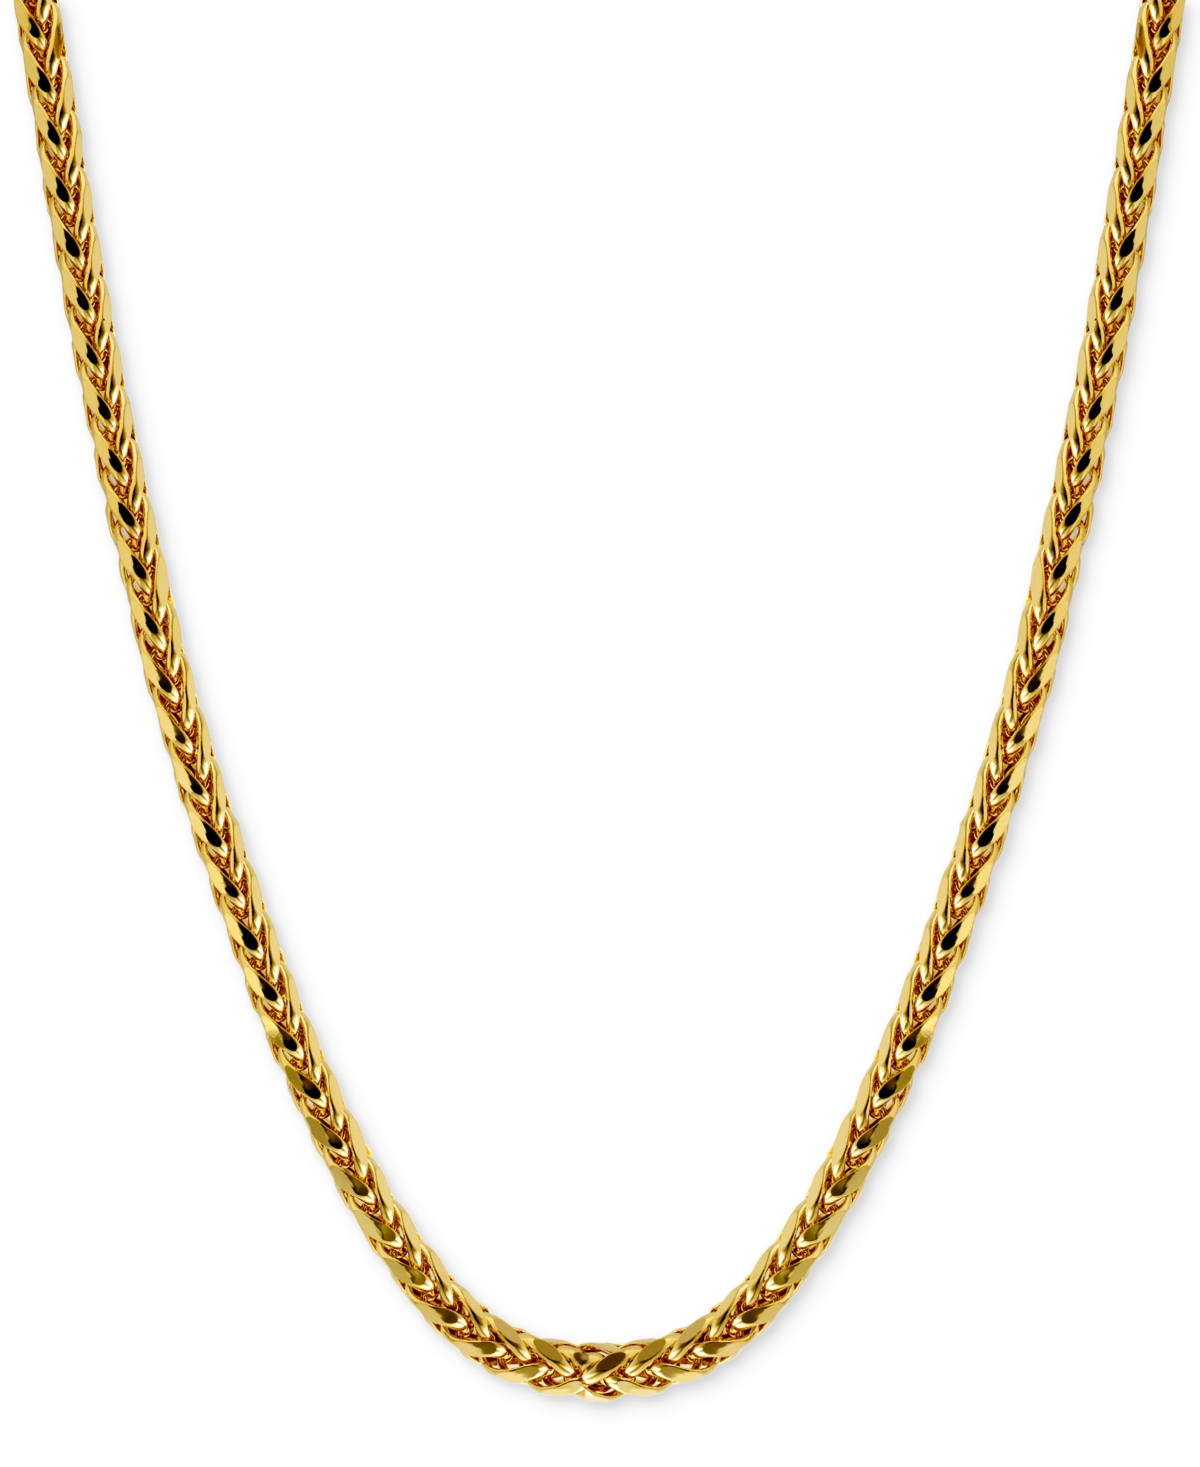 Polished Square Wheat 20" Chain Necklace (3mm) in 14k Gold - Yellow Gold